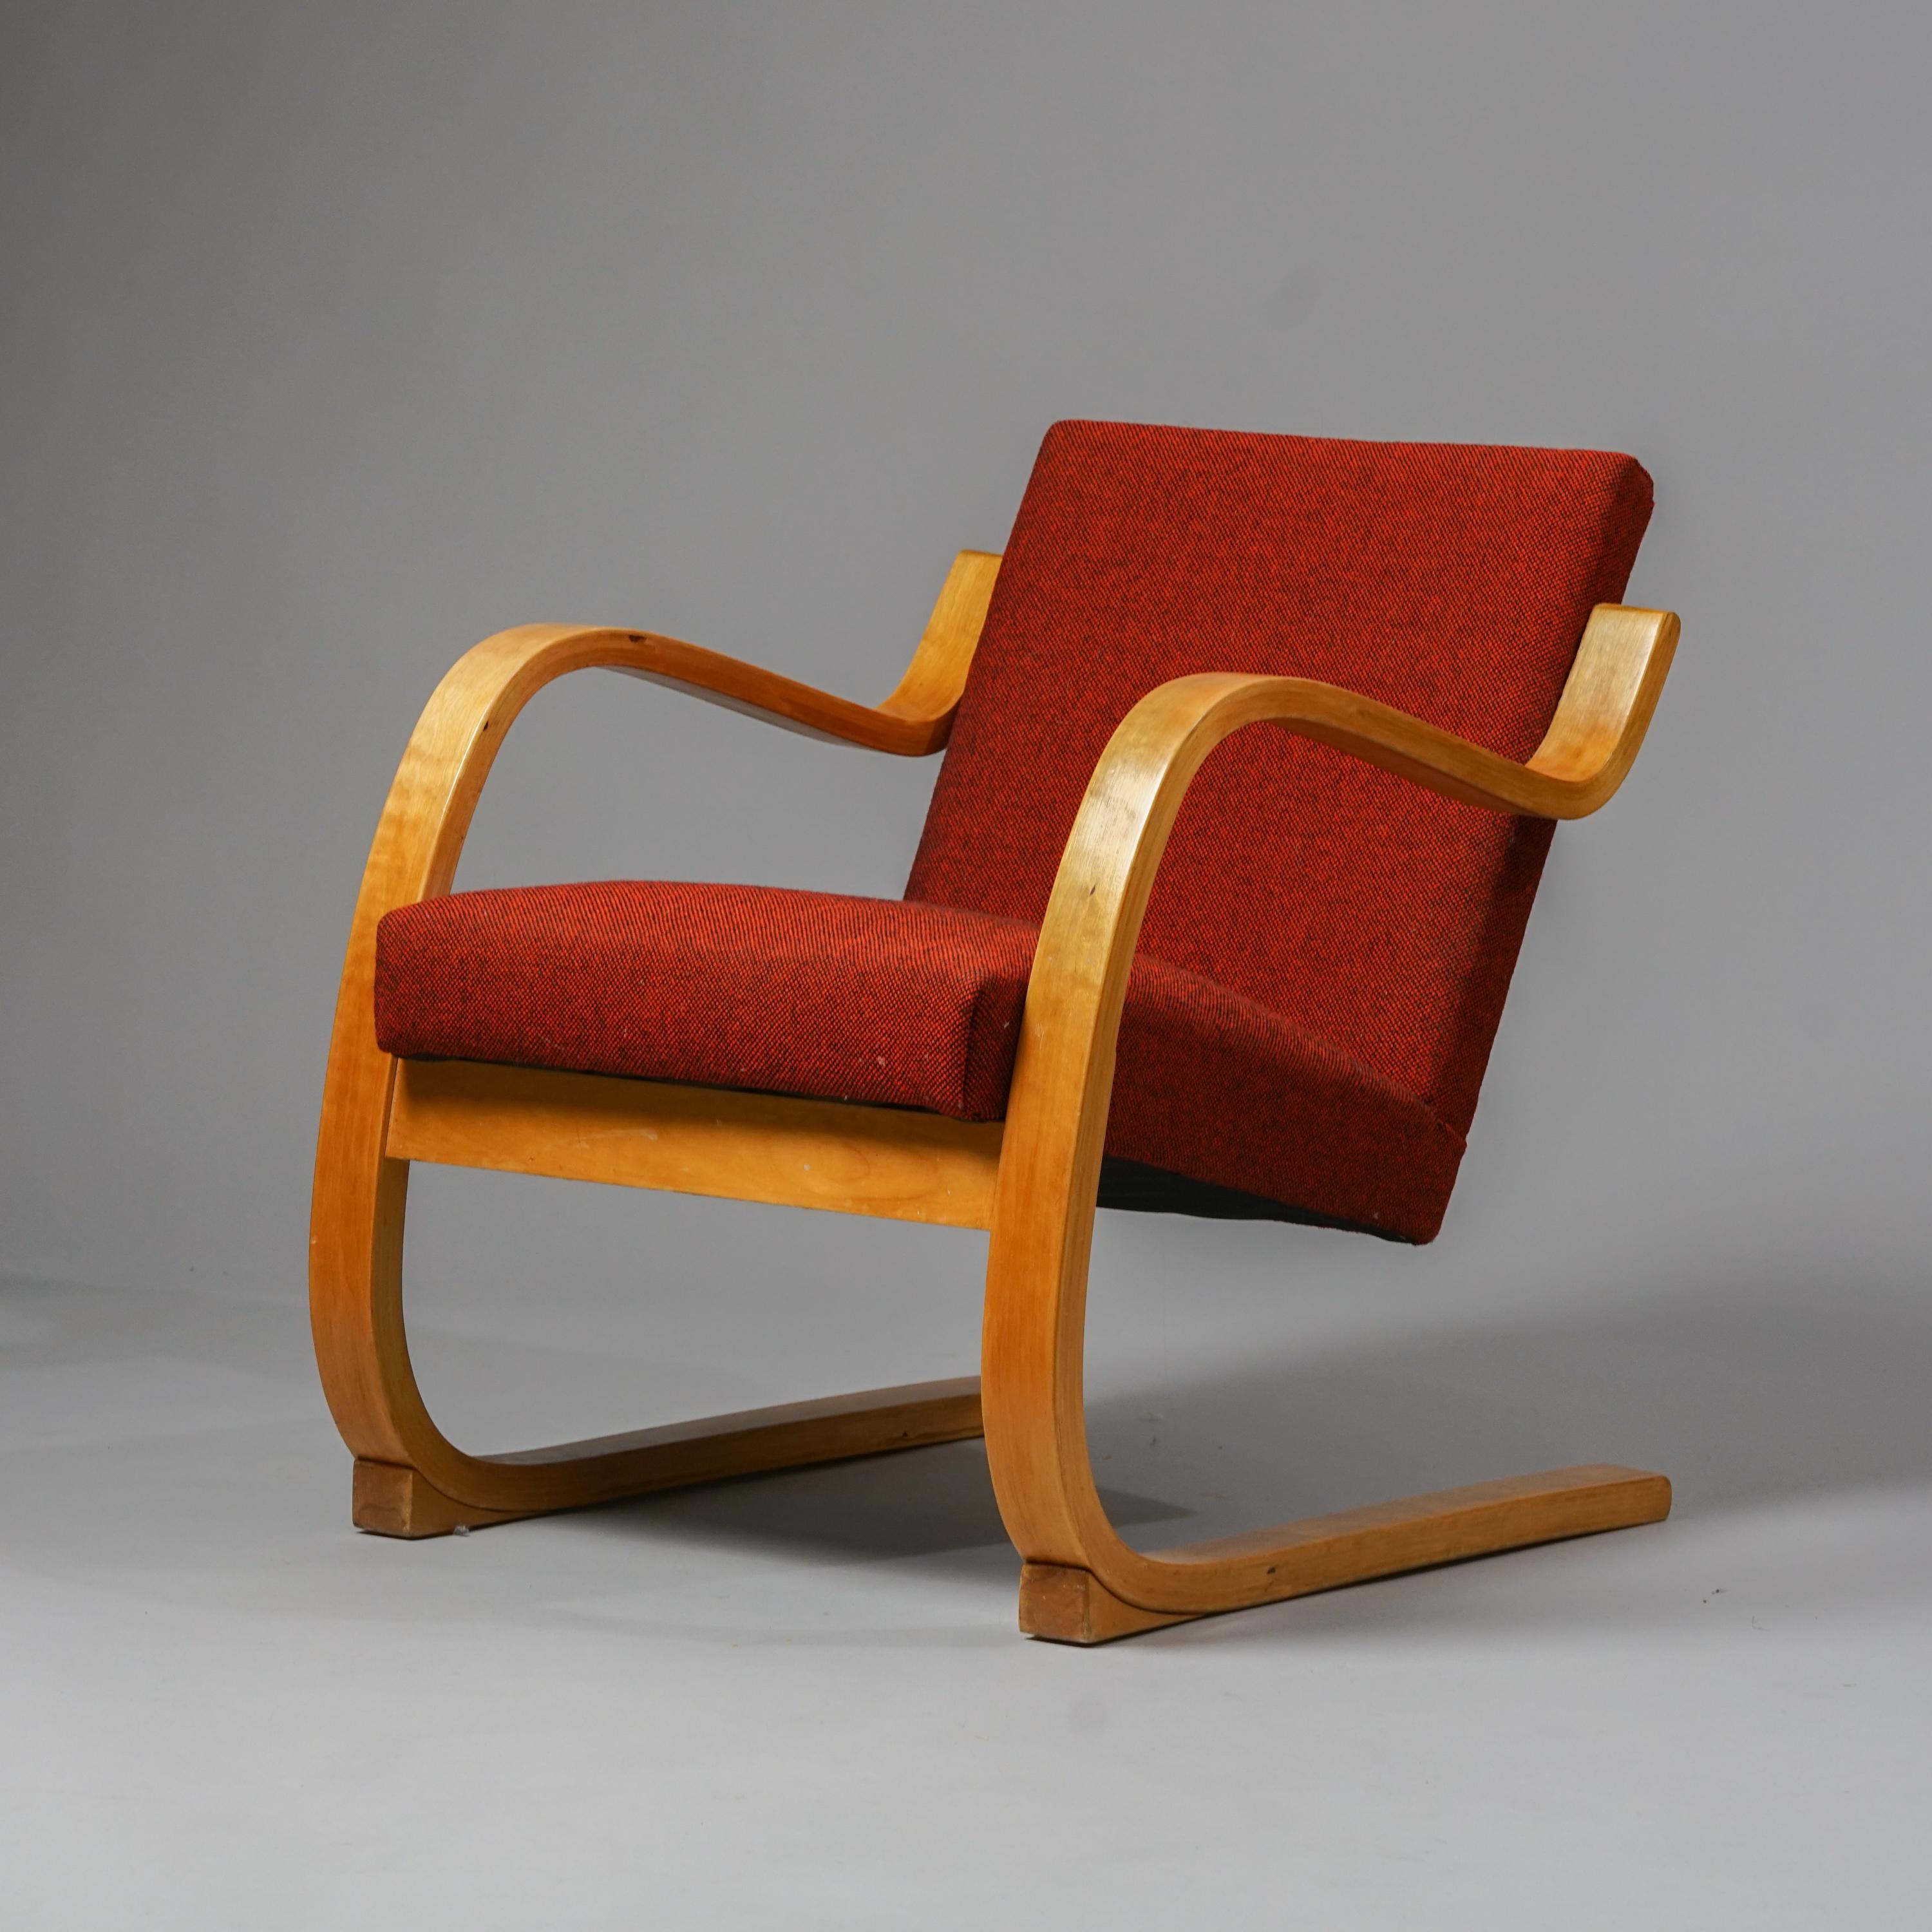 Rare model 402 armchair by Alvar Aalto for Artek from the 1950s with wedges on the legs. Lacquered birch legs, red woolblend fabric upholstery. Good vintage condition, minor wear consistent with age and use. Beautiful patina on the birch parts.